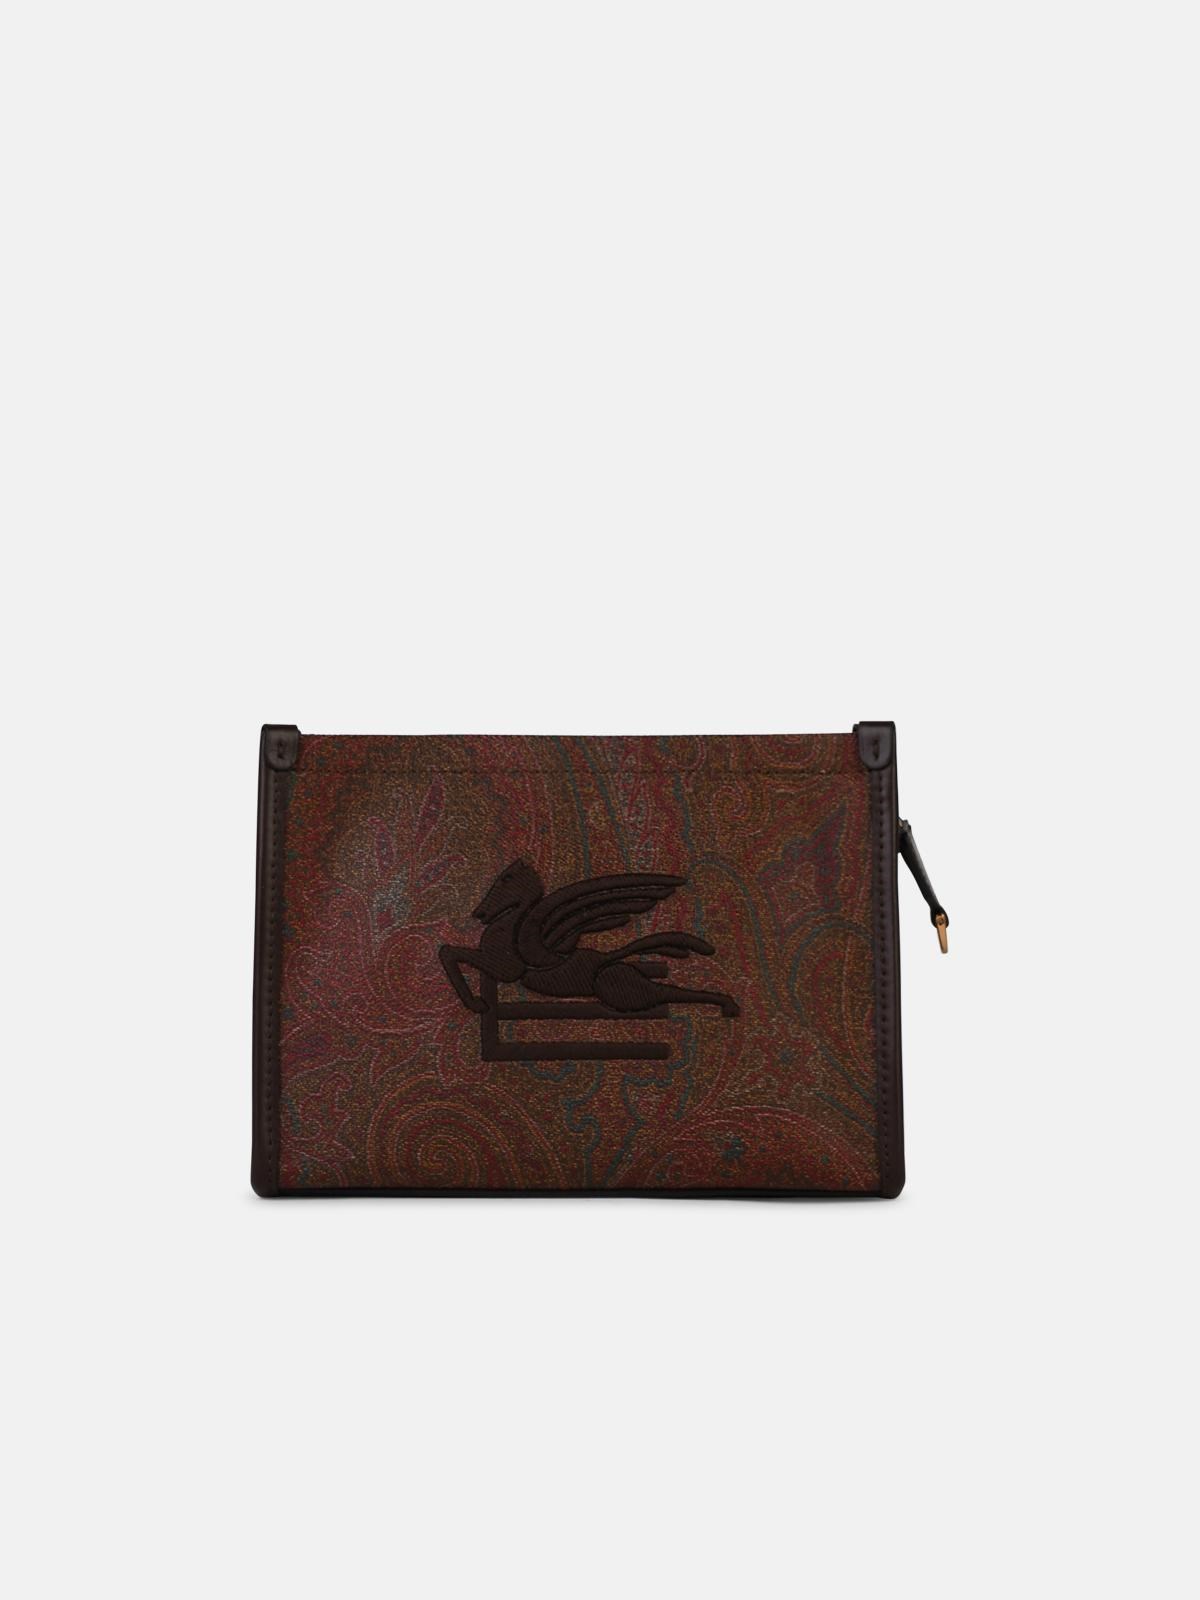 Etro 'arnica' Brown Leather Clutch Bag